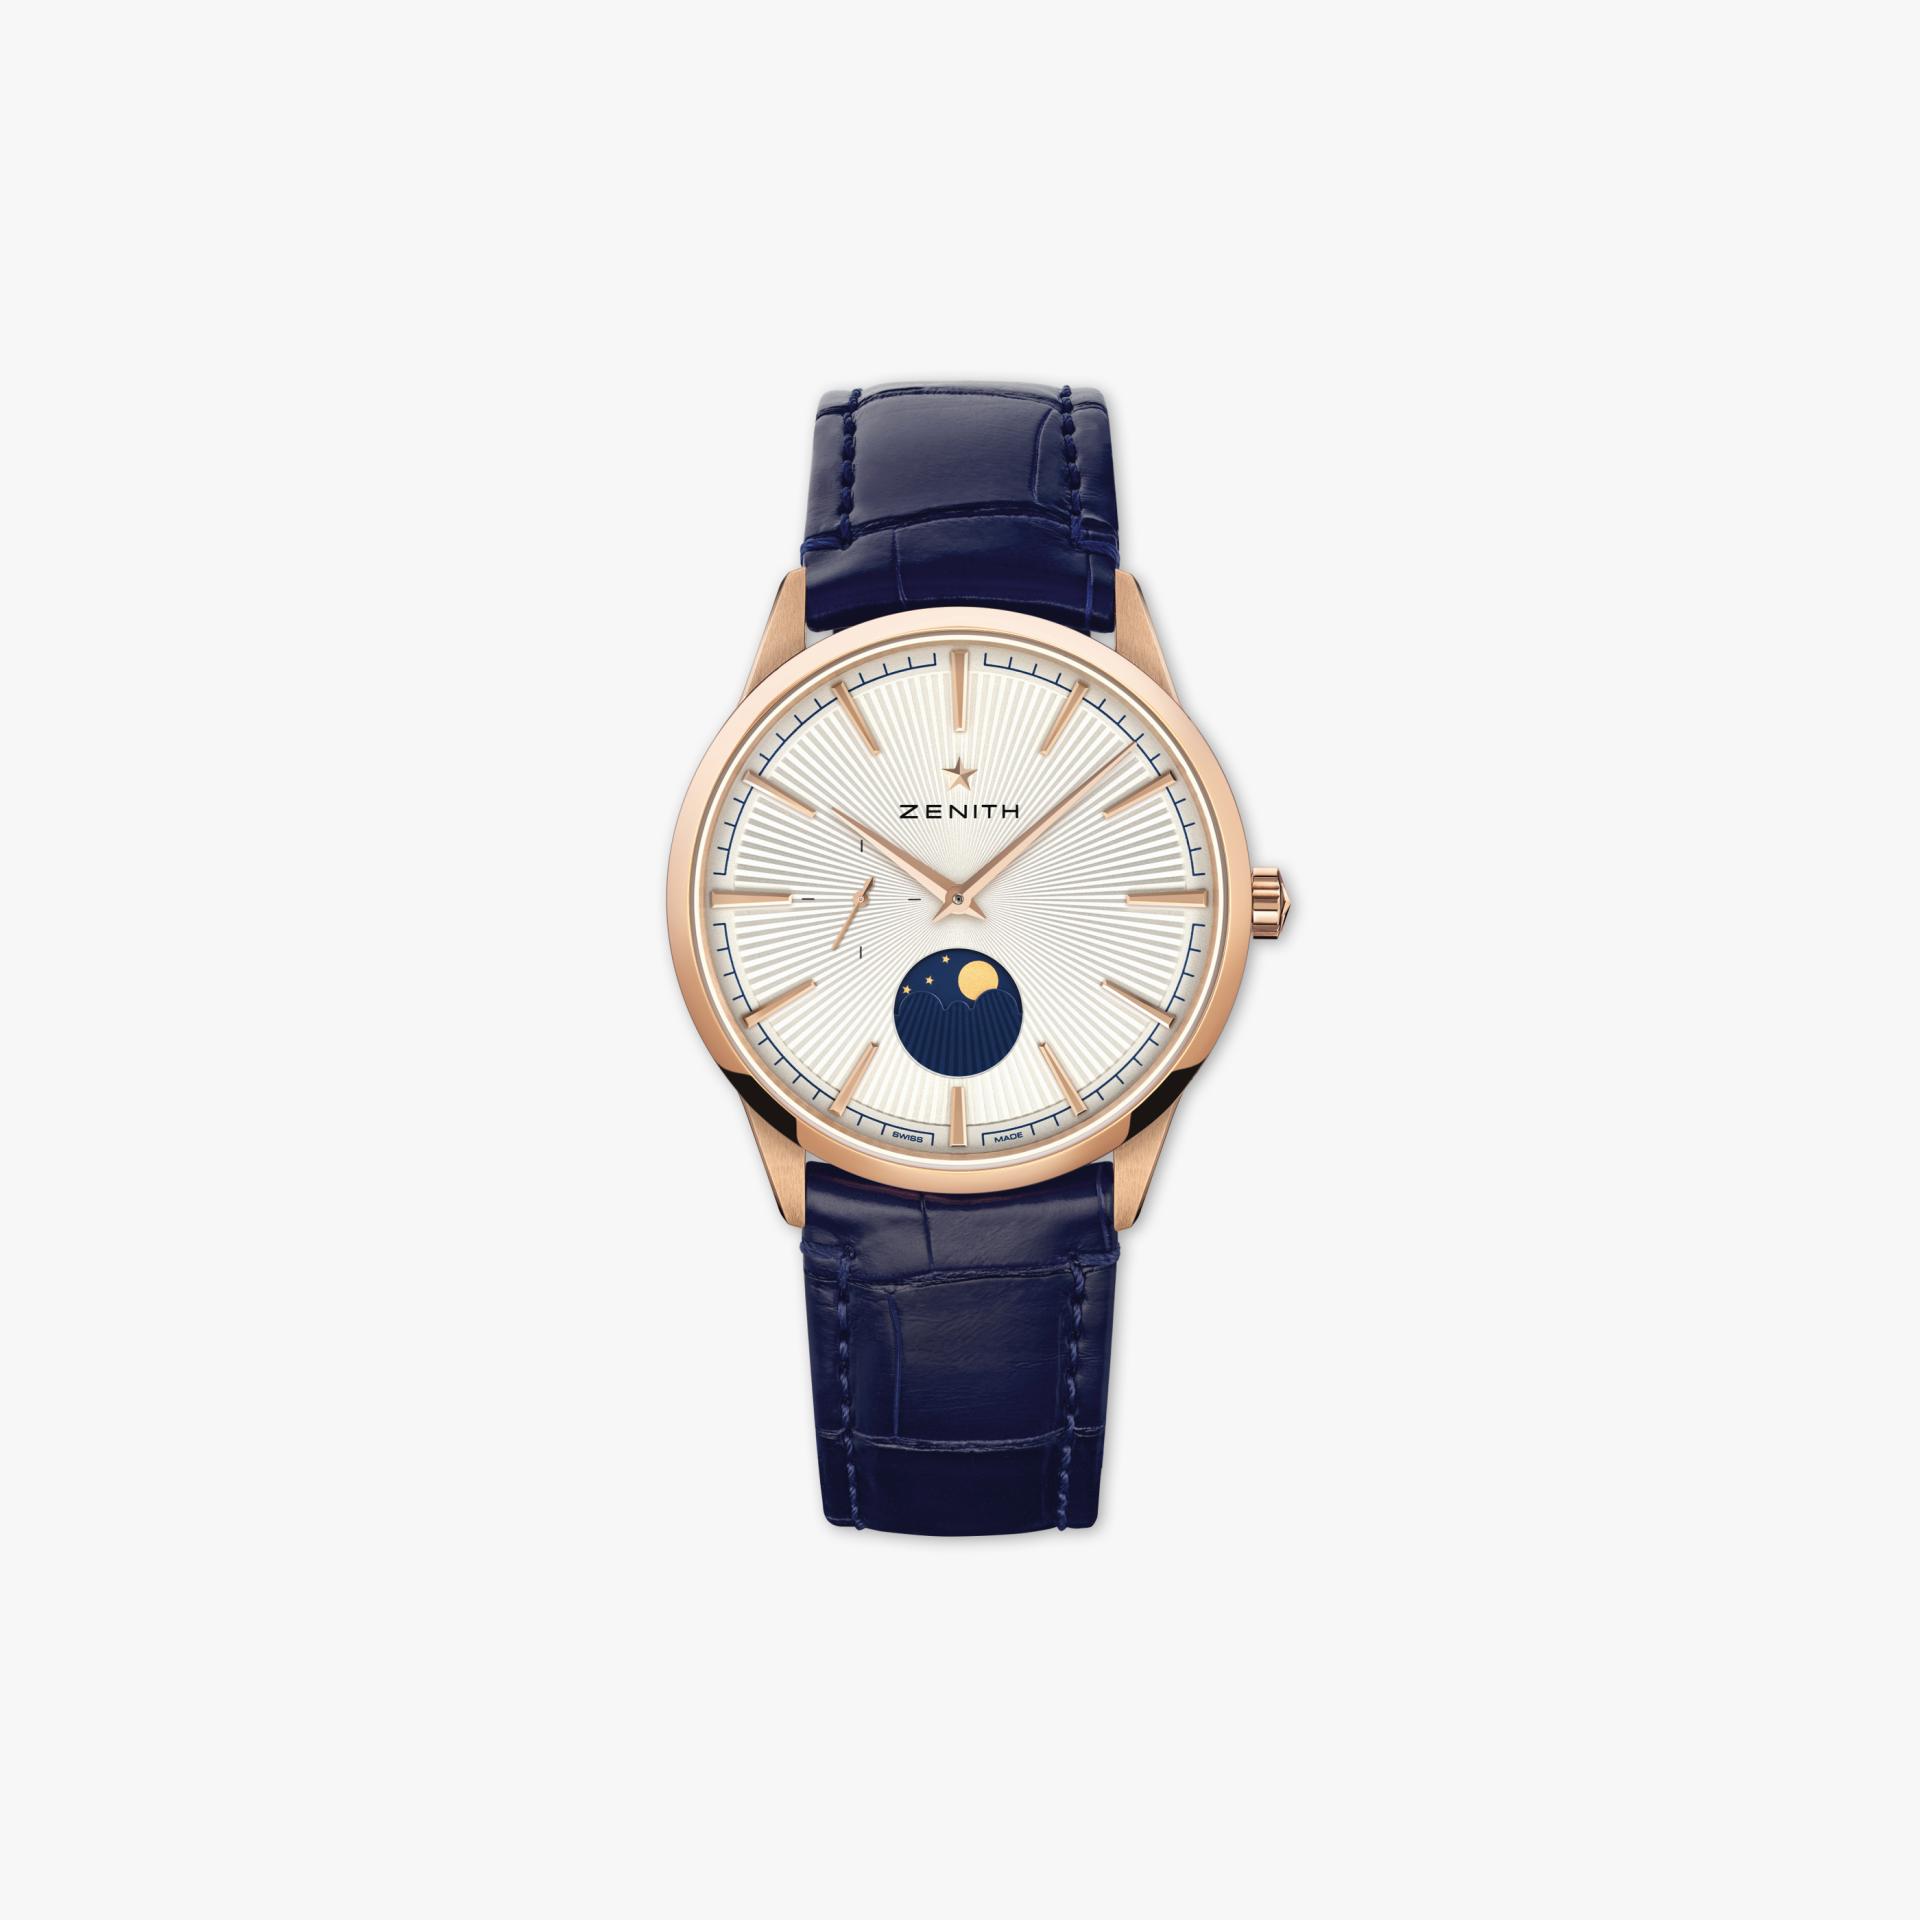 Elite Moonphase made by Zenith